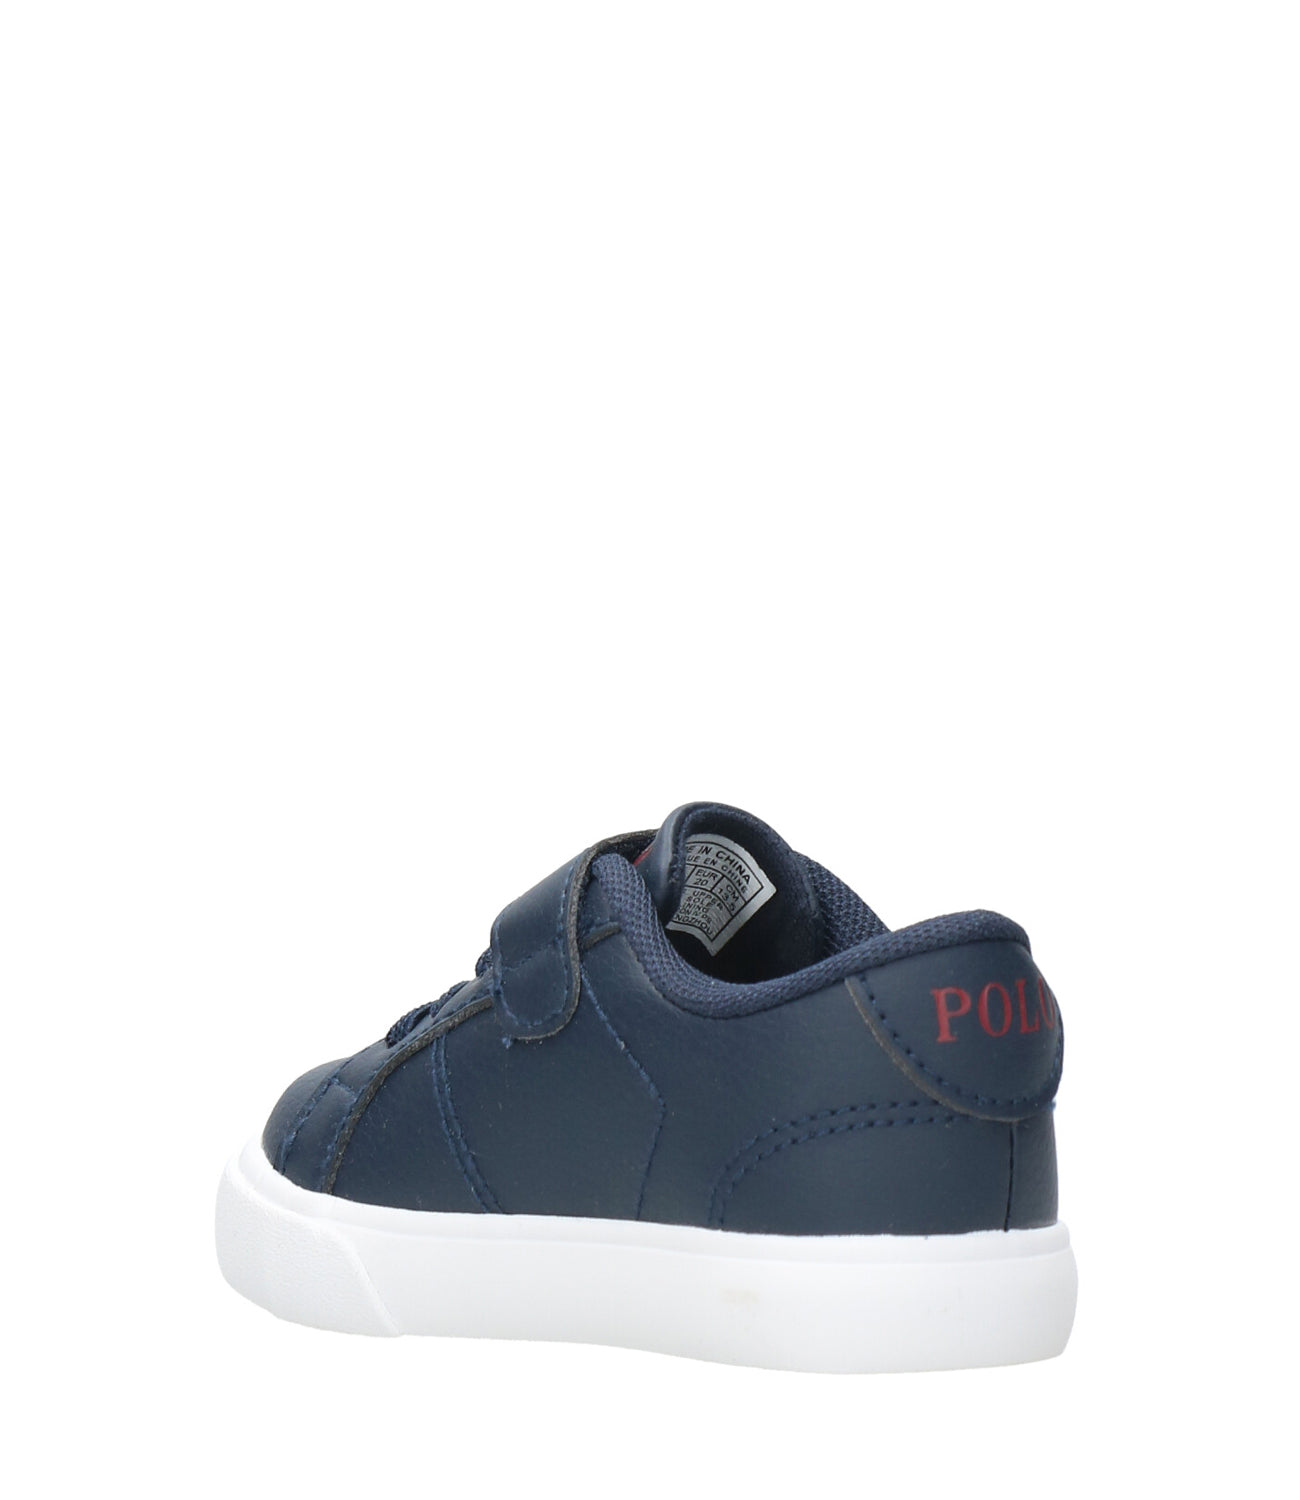 Ralph Lauren Childrenswear | Blue and Red Sneakers